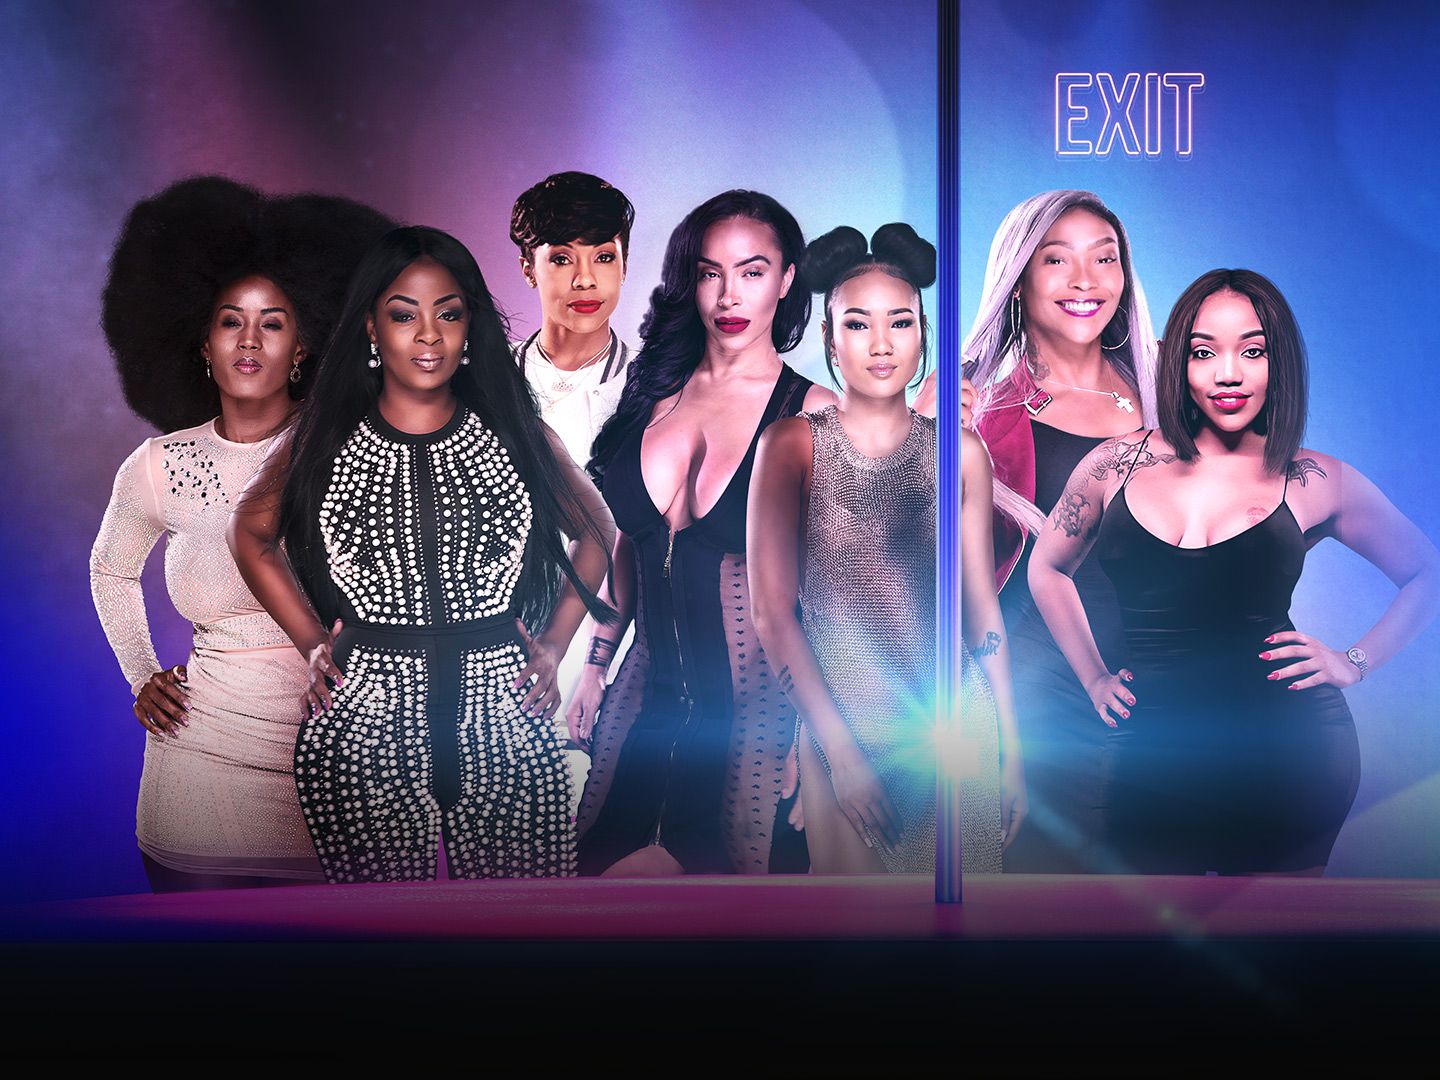 We-tv Debuts Reality Show About Current Former Strippers